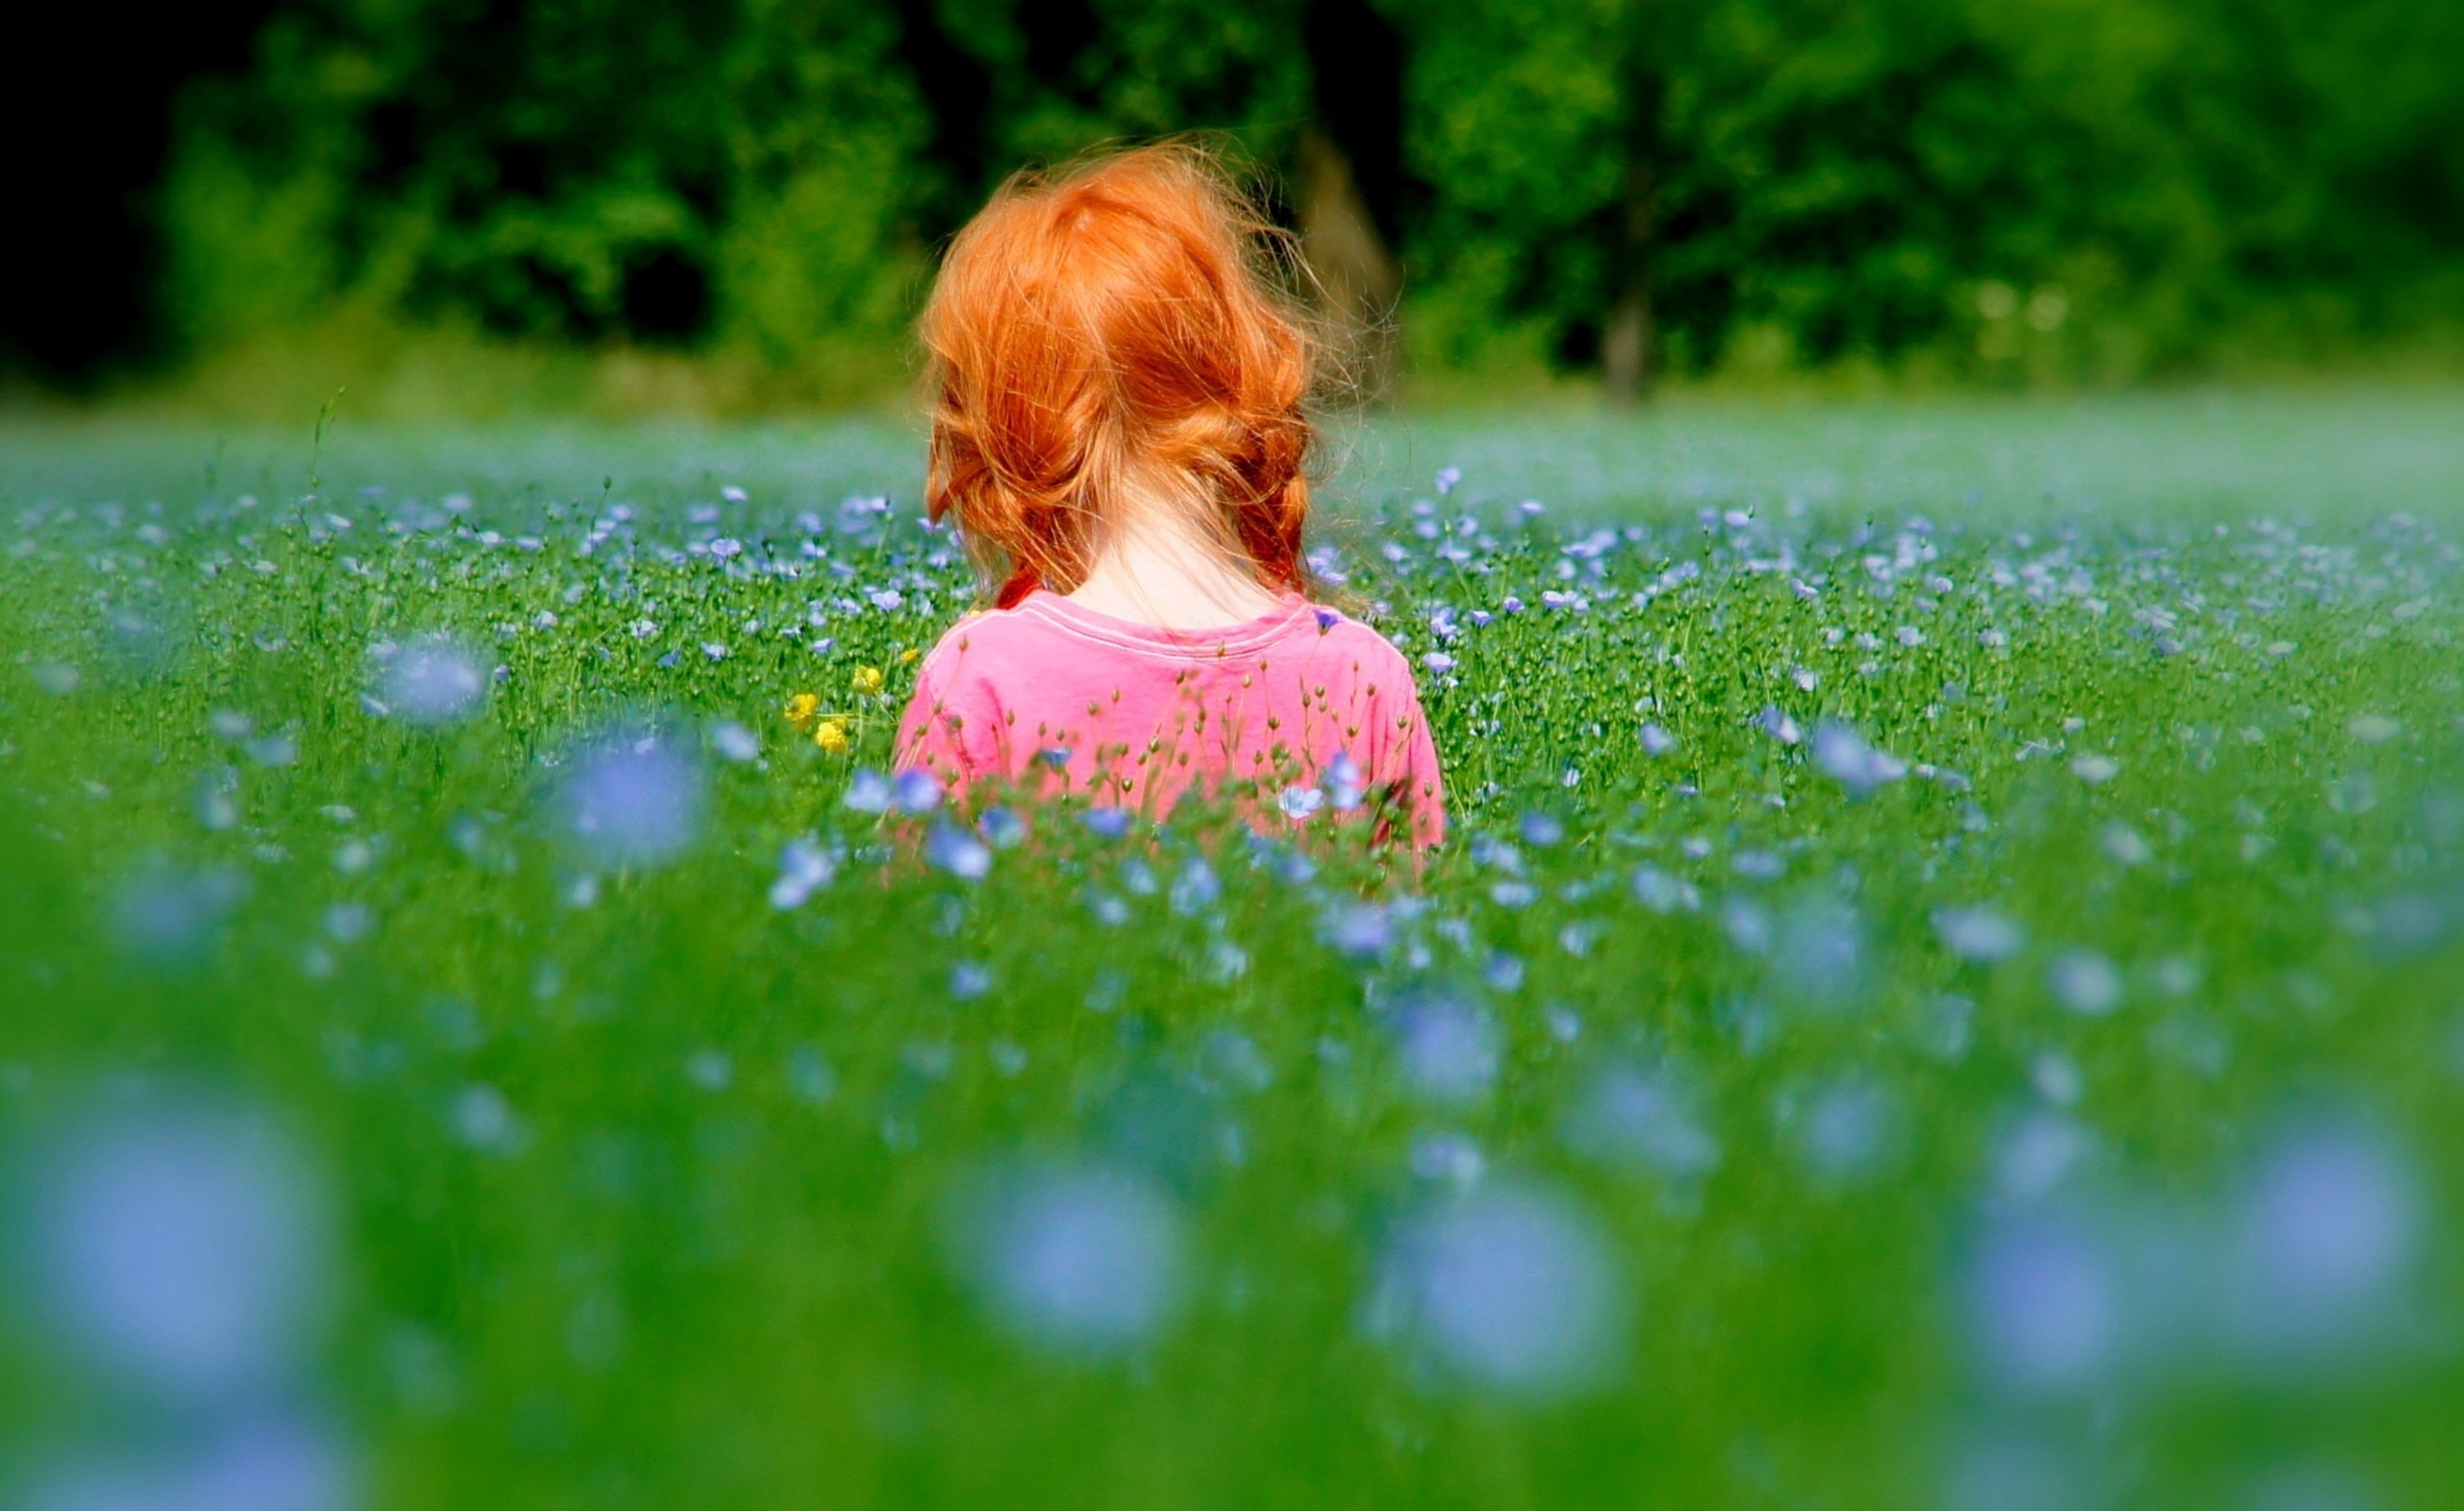 baby, Beautiful, Bed, Childhood, Children, Flowers, Kids, Life, Little, Girls, Spring, Grass, Plants, Landscapes, Nature, Earth, Spring Wallpaper